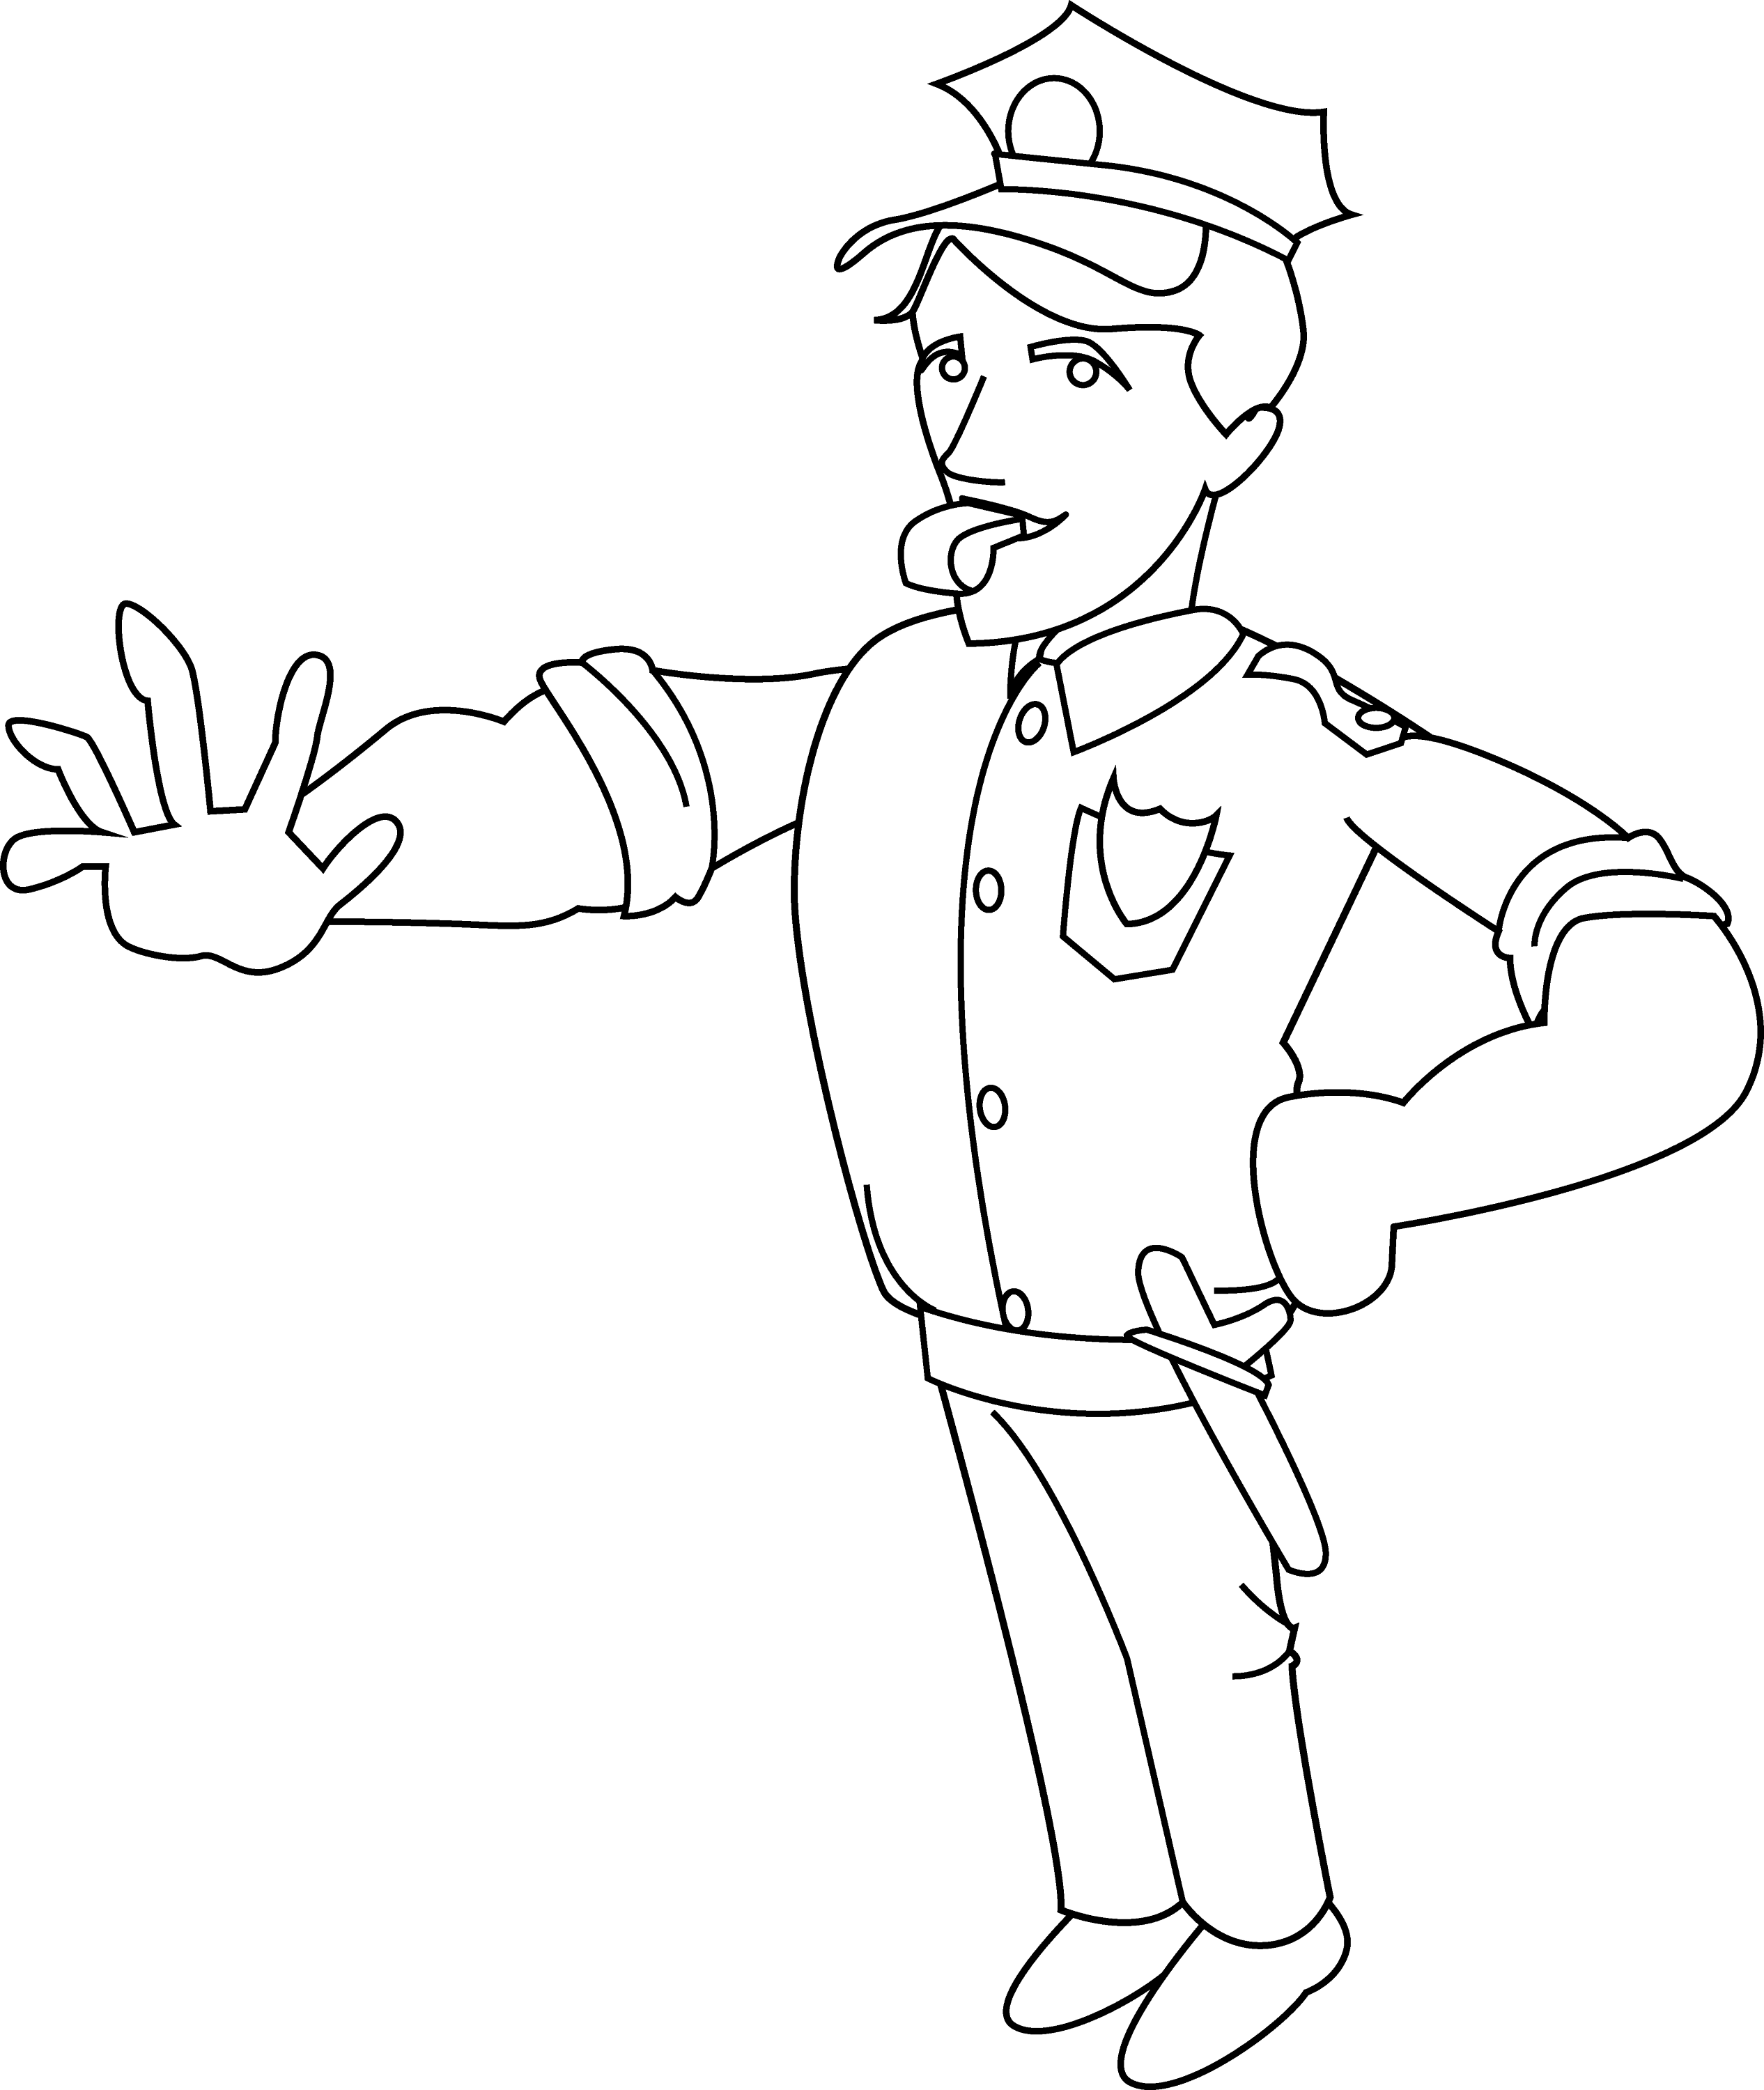 security guard clipart black and white - photo #50